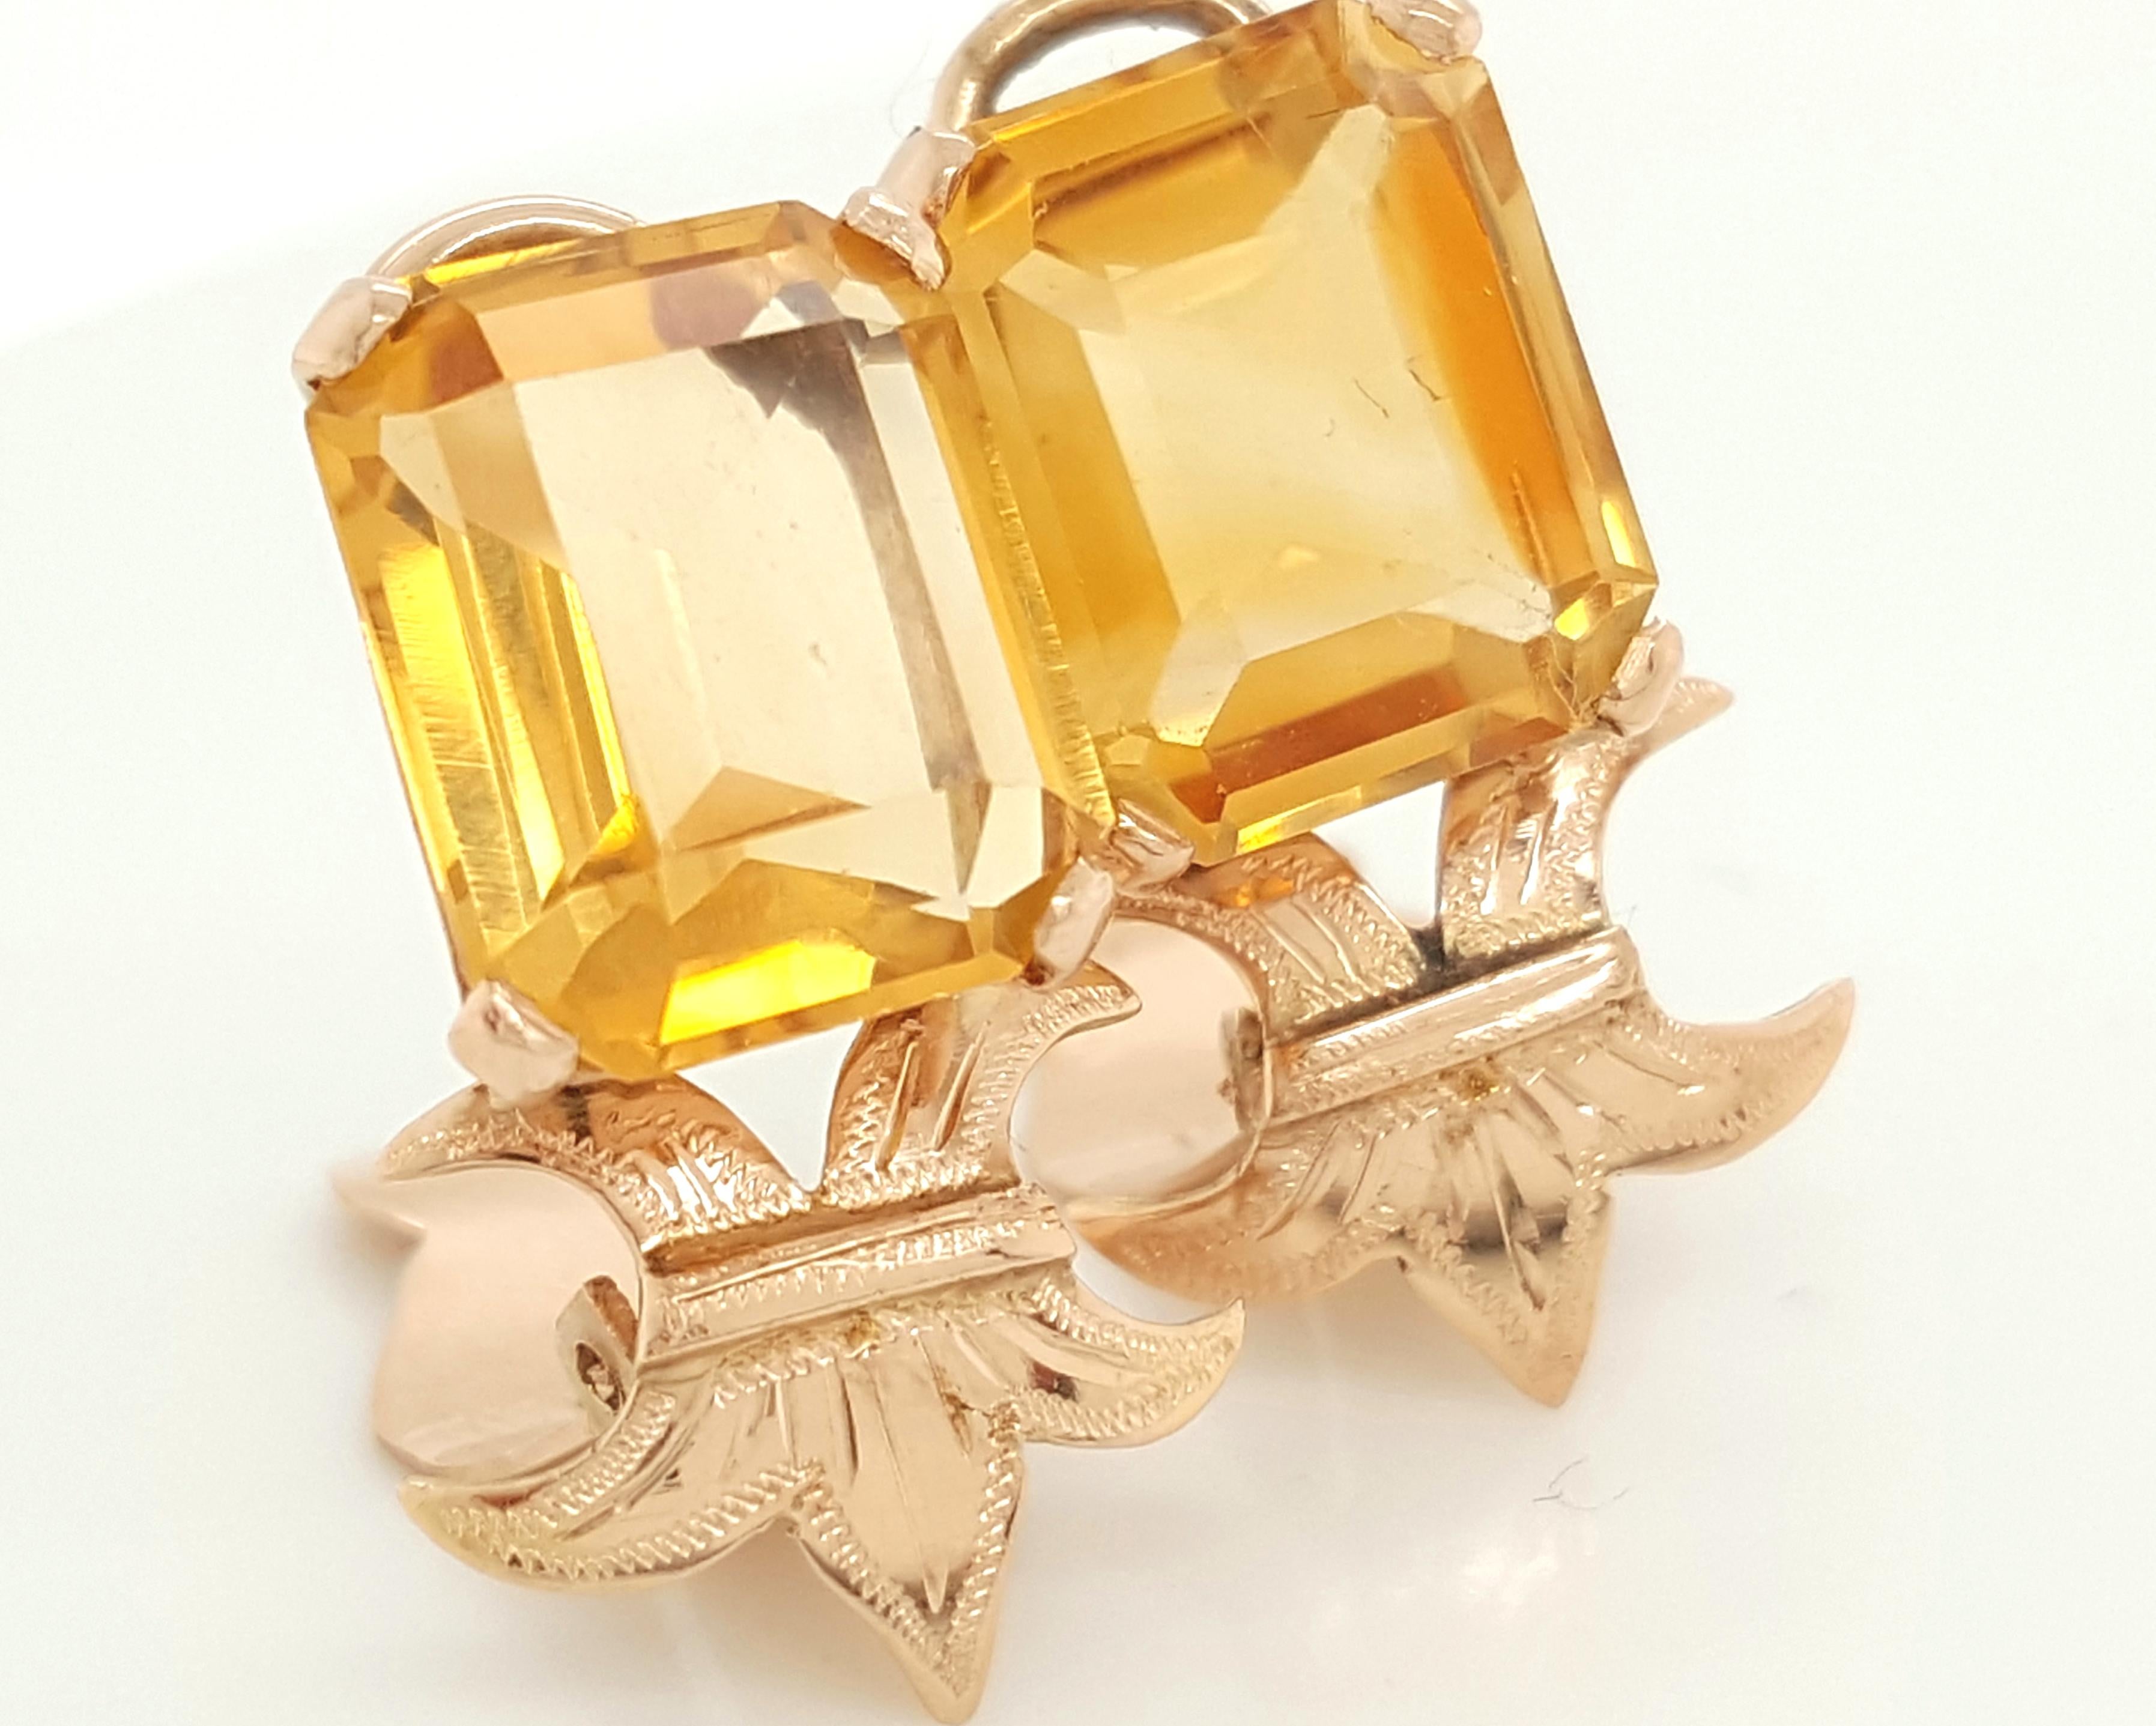 14 Karat Yellow Gold Emerald Step Cut Citrine Ear Clips. These tailored and unique earrings feature a matched pair of step cut shaped citrine weighing approximately 6.8 carats total weight. The citrine are each set into a 14 karat yellow gold four